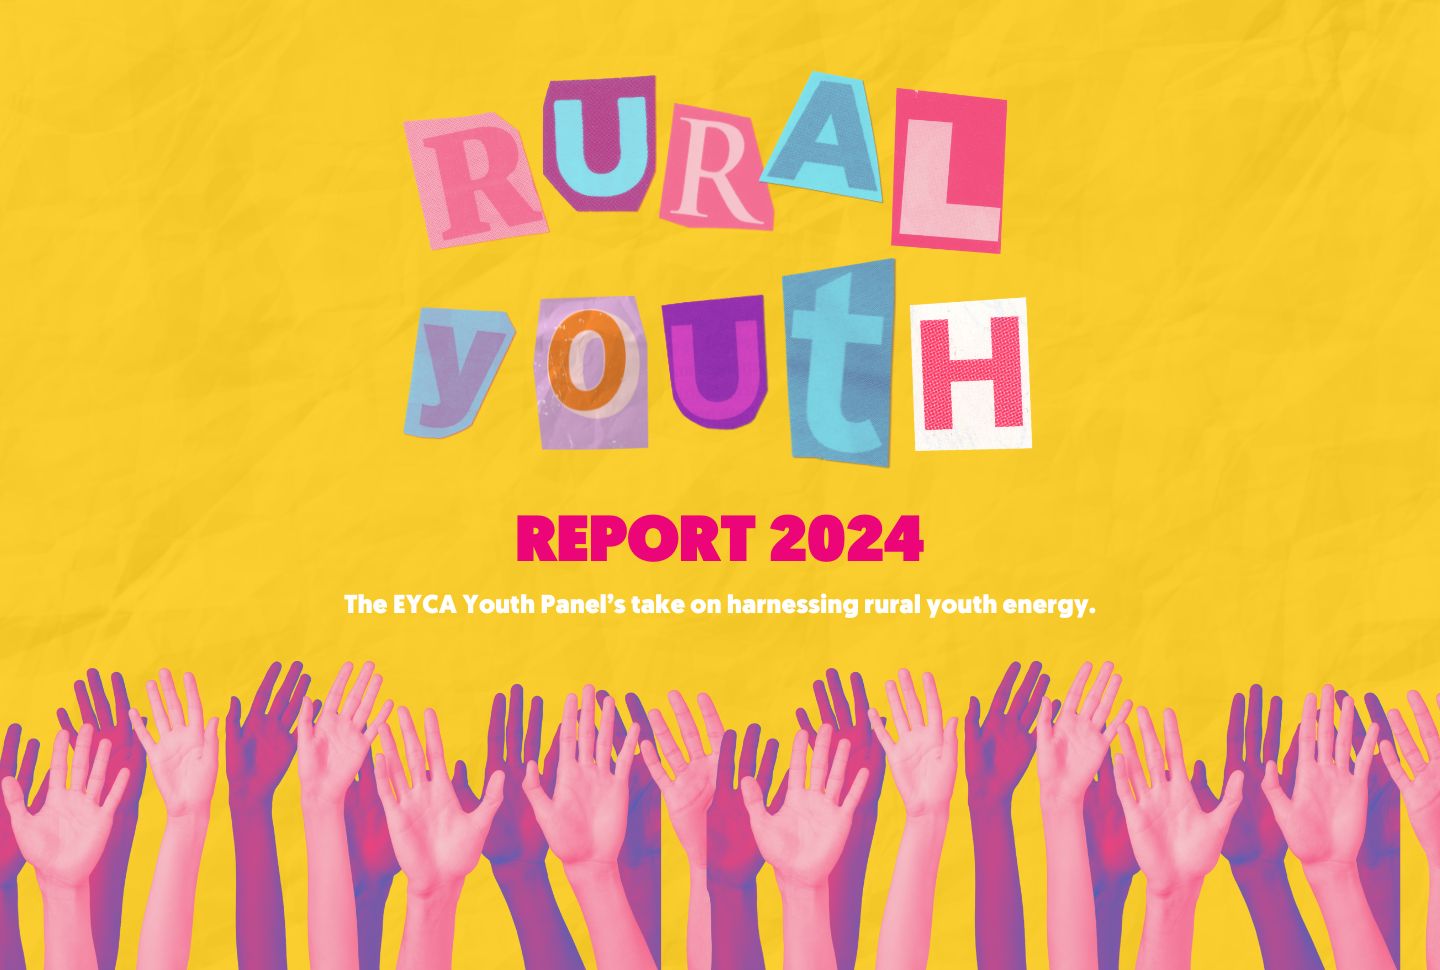 rural youth report 2024